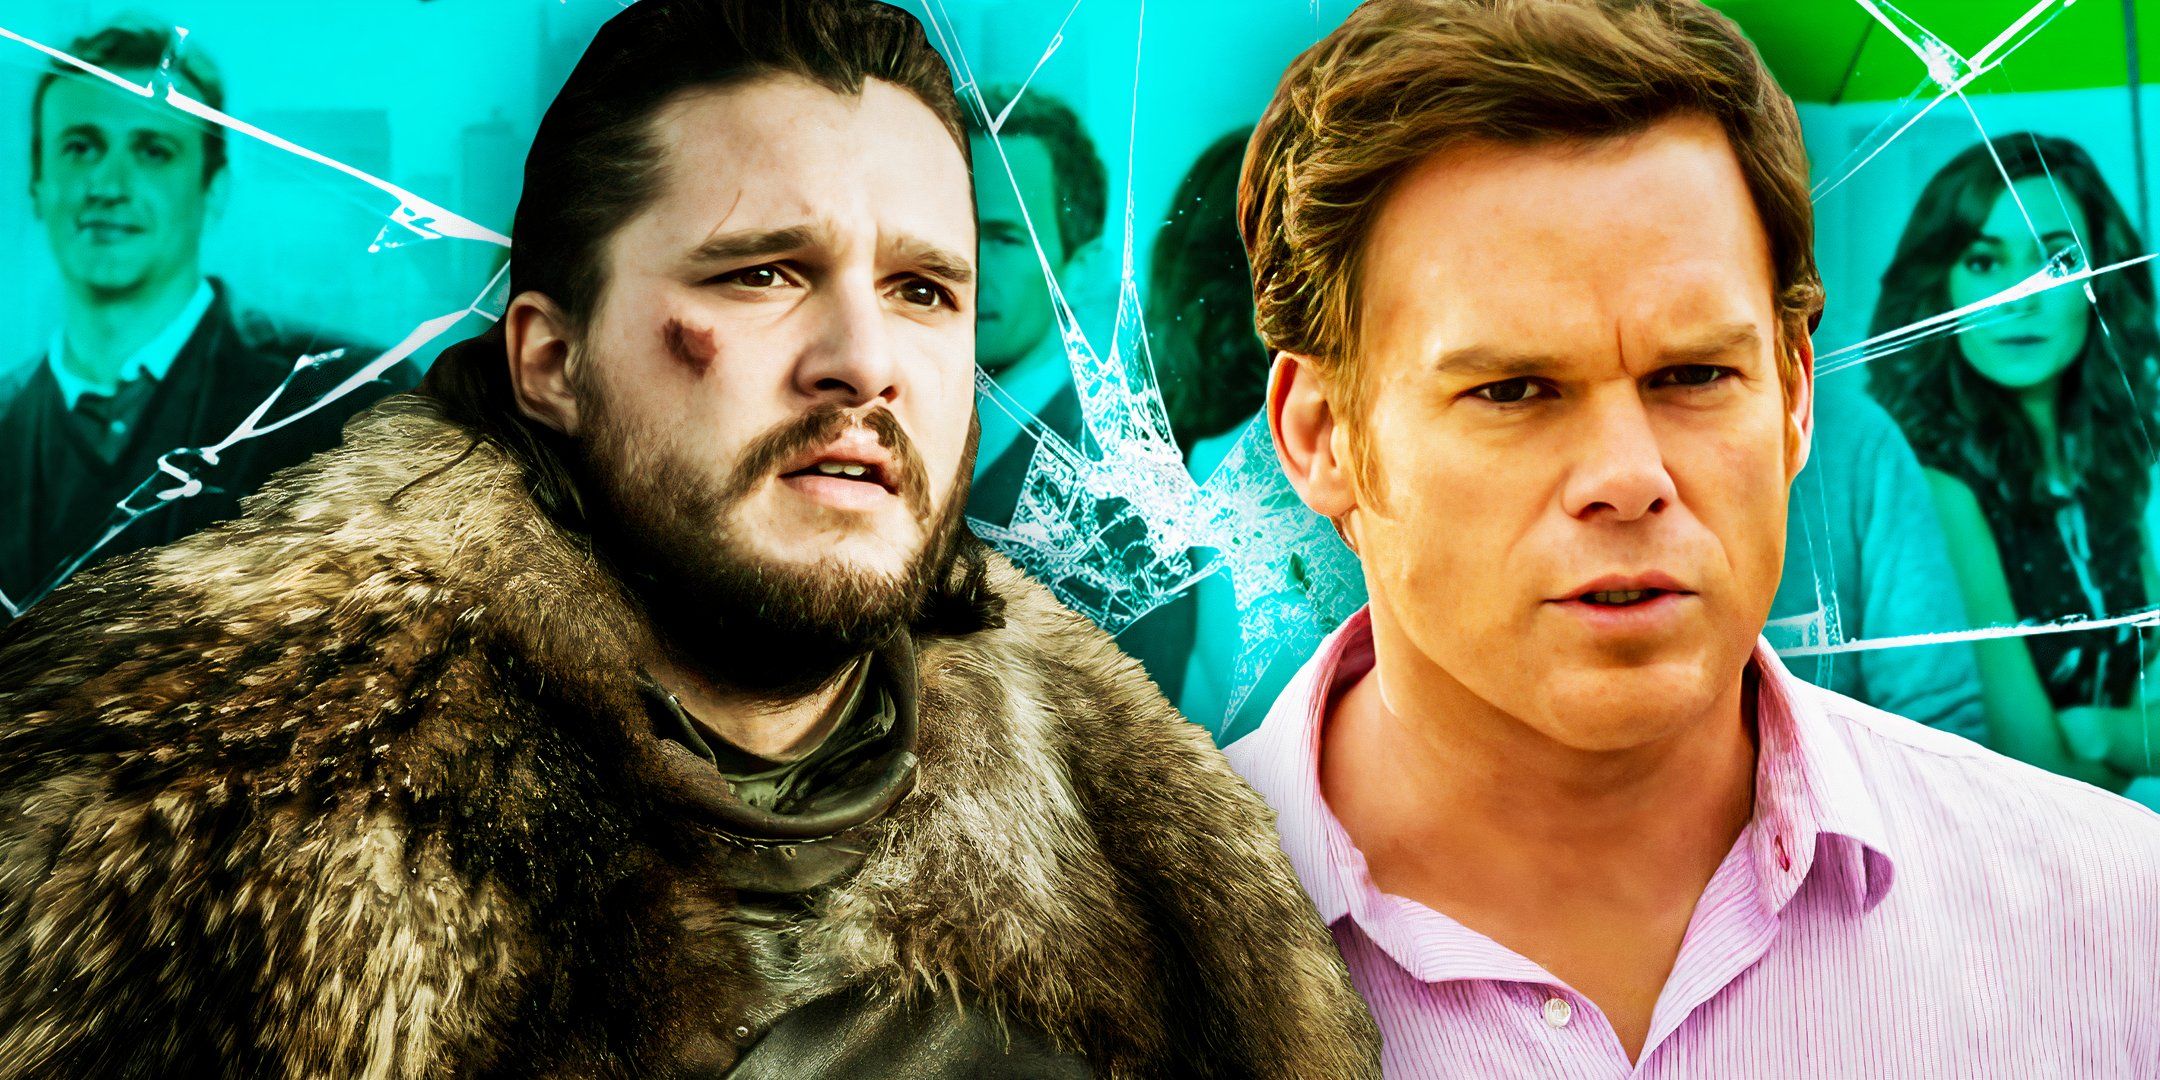 (Kit-Harington-as-Jon-Snow)-from-Game-Of-Thrones-and-(Michael-C